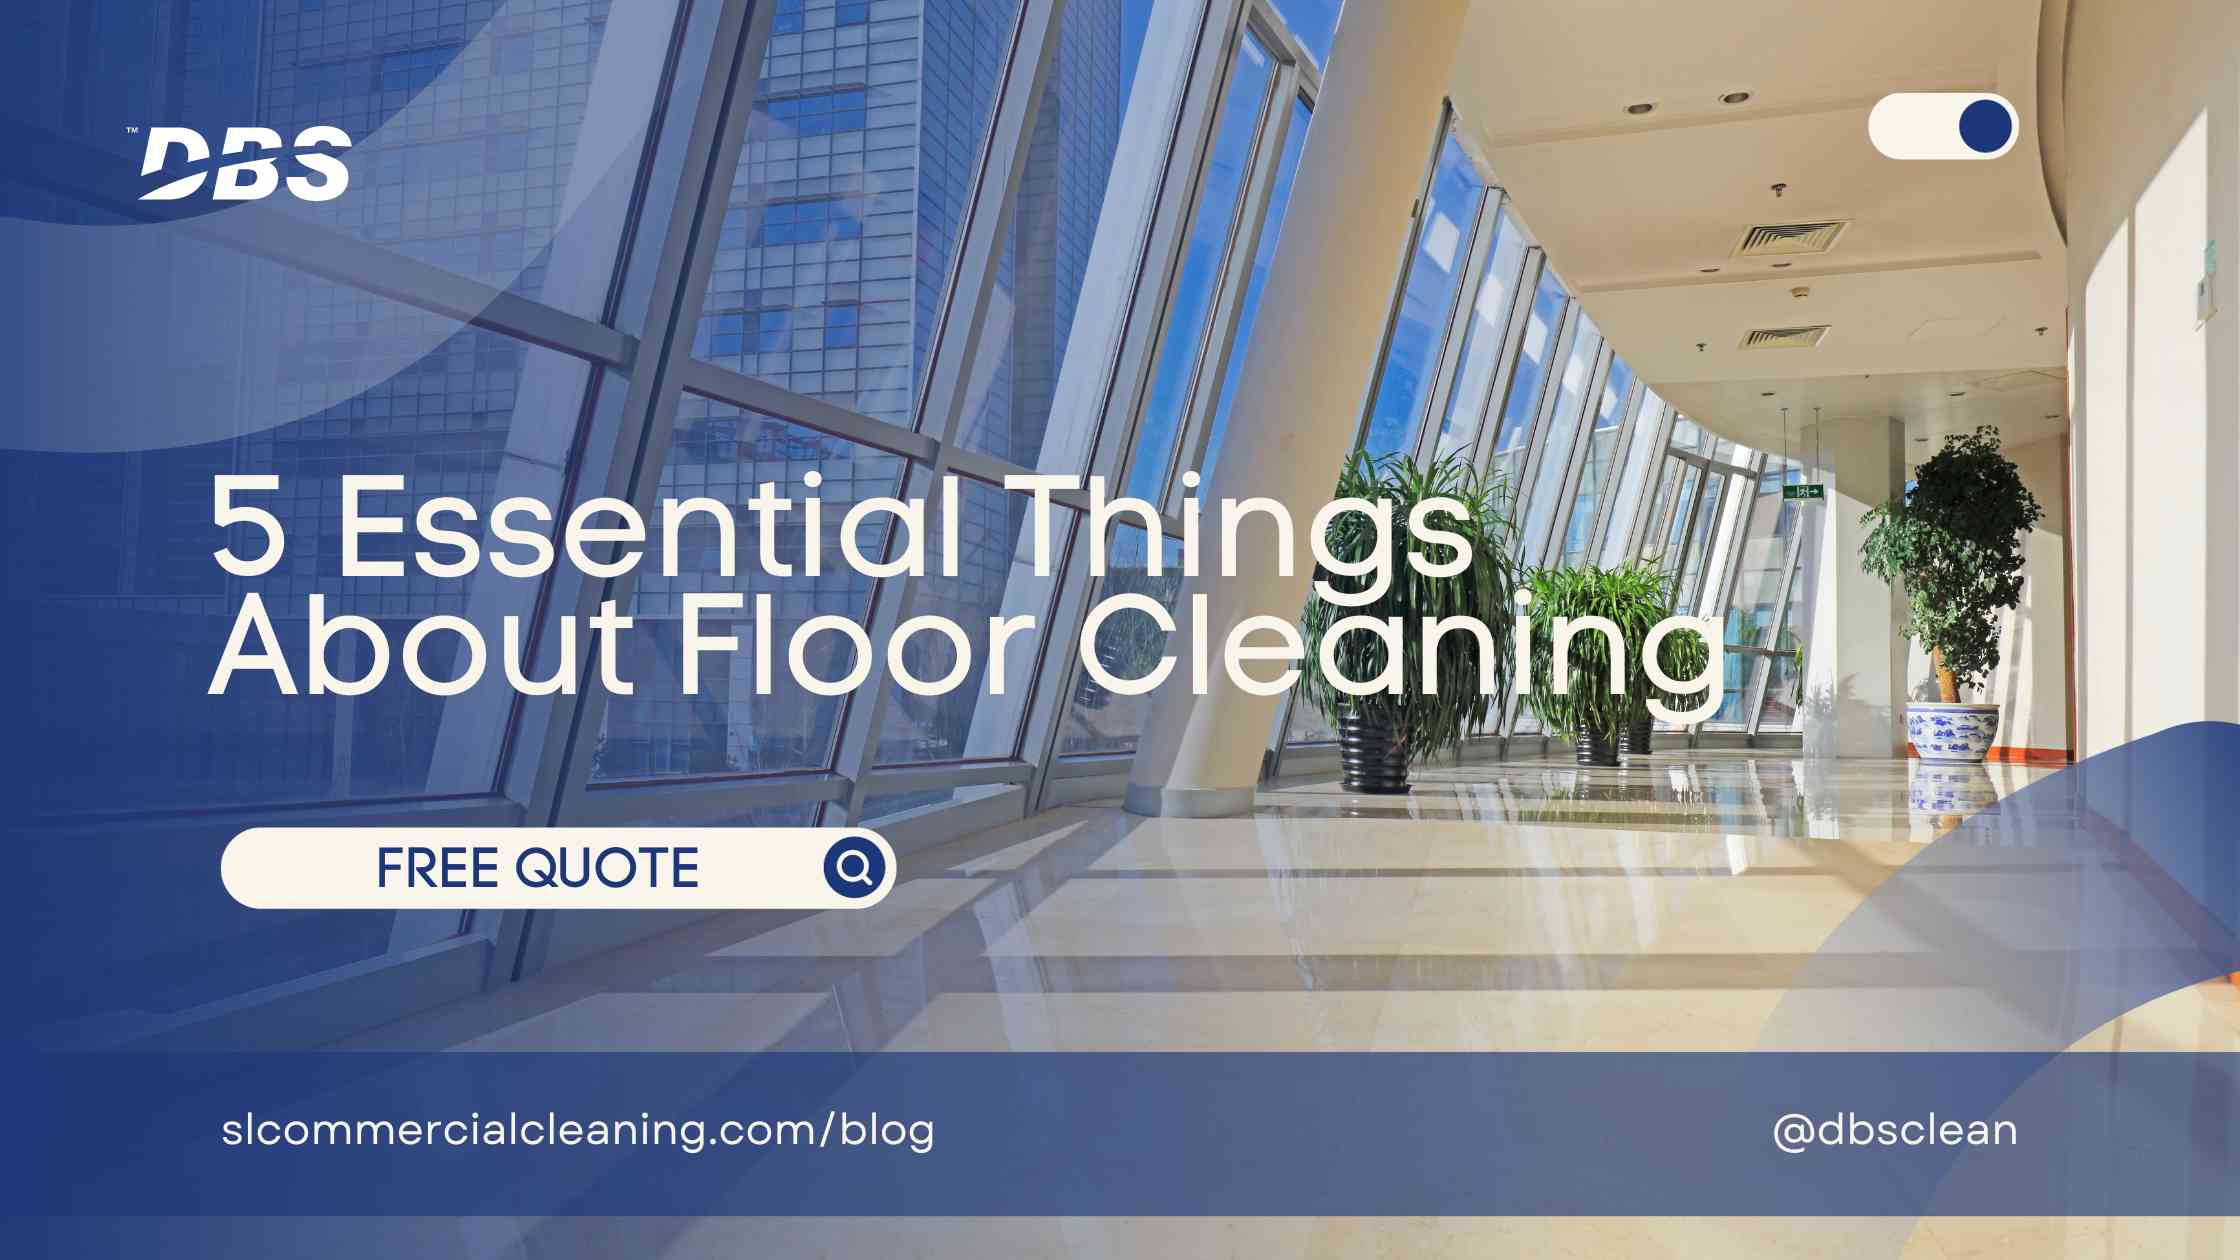 5 Essential Things About Floor Cleaning